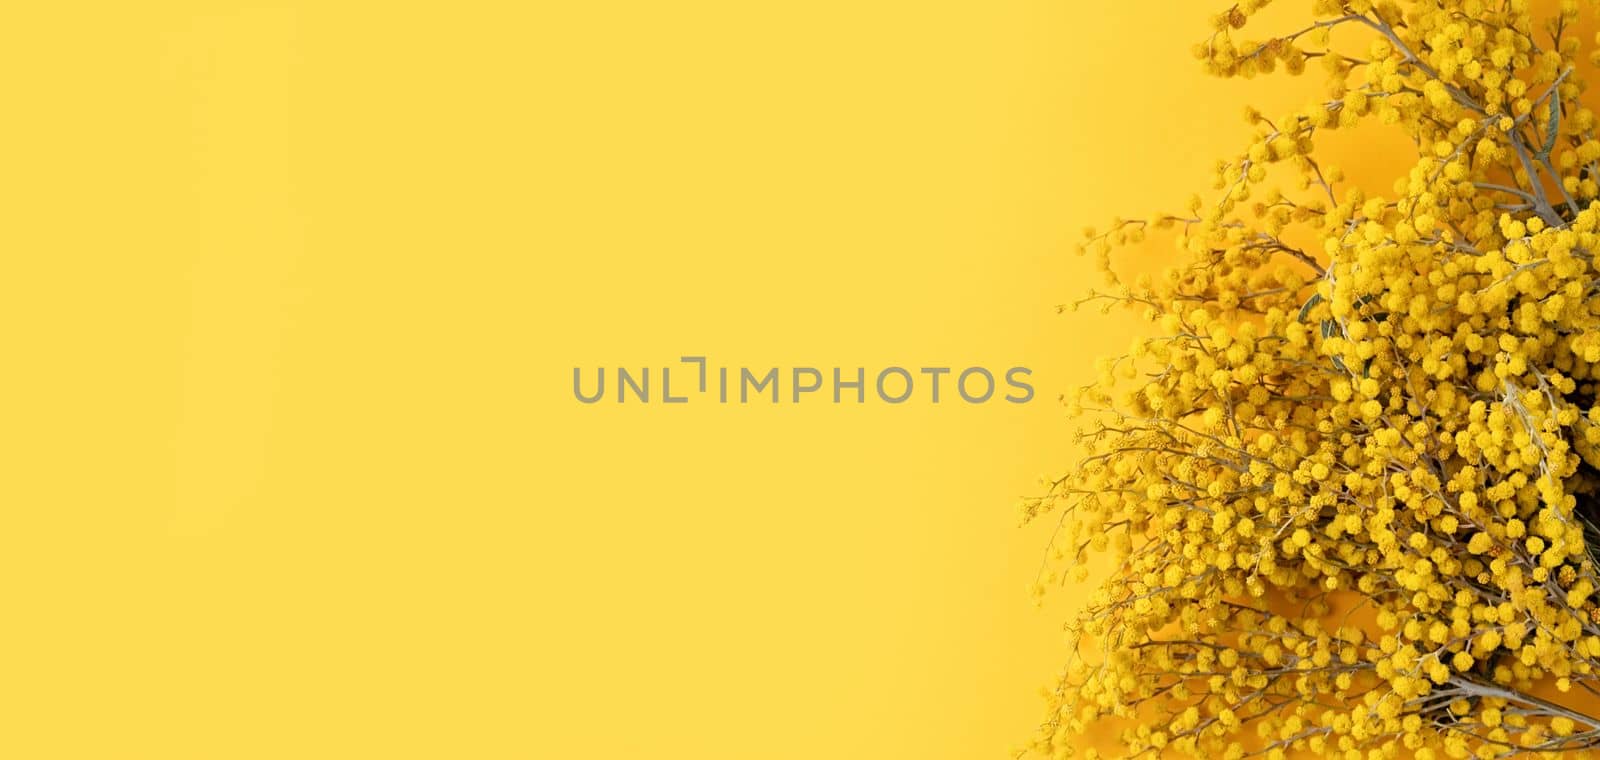 Frame of yellow mimosa flowers on yellow solid bakground by Desperada